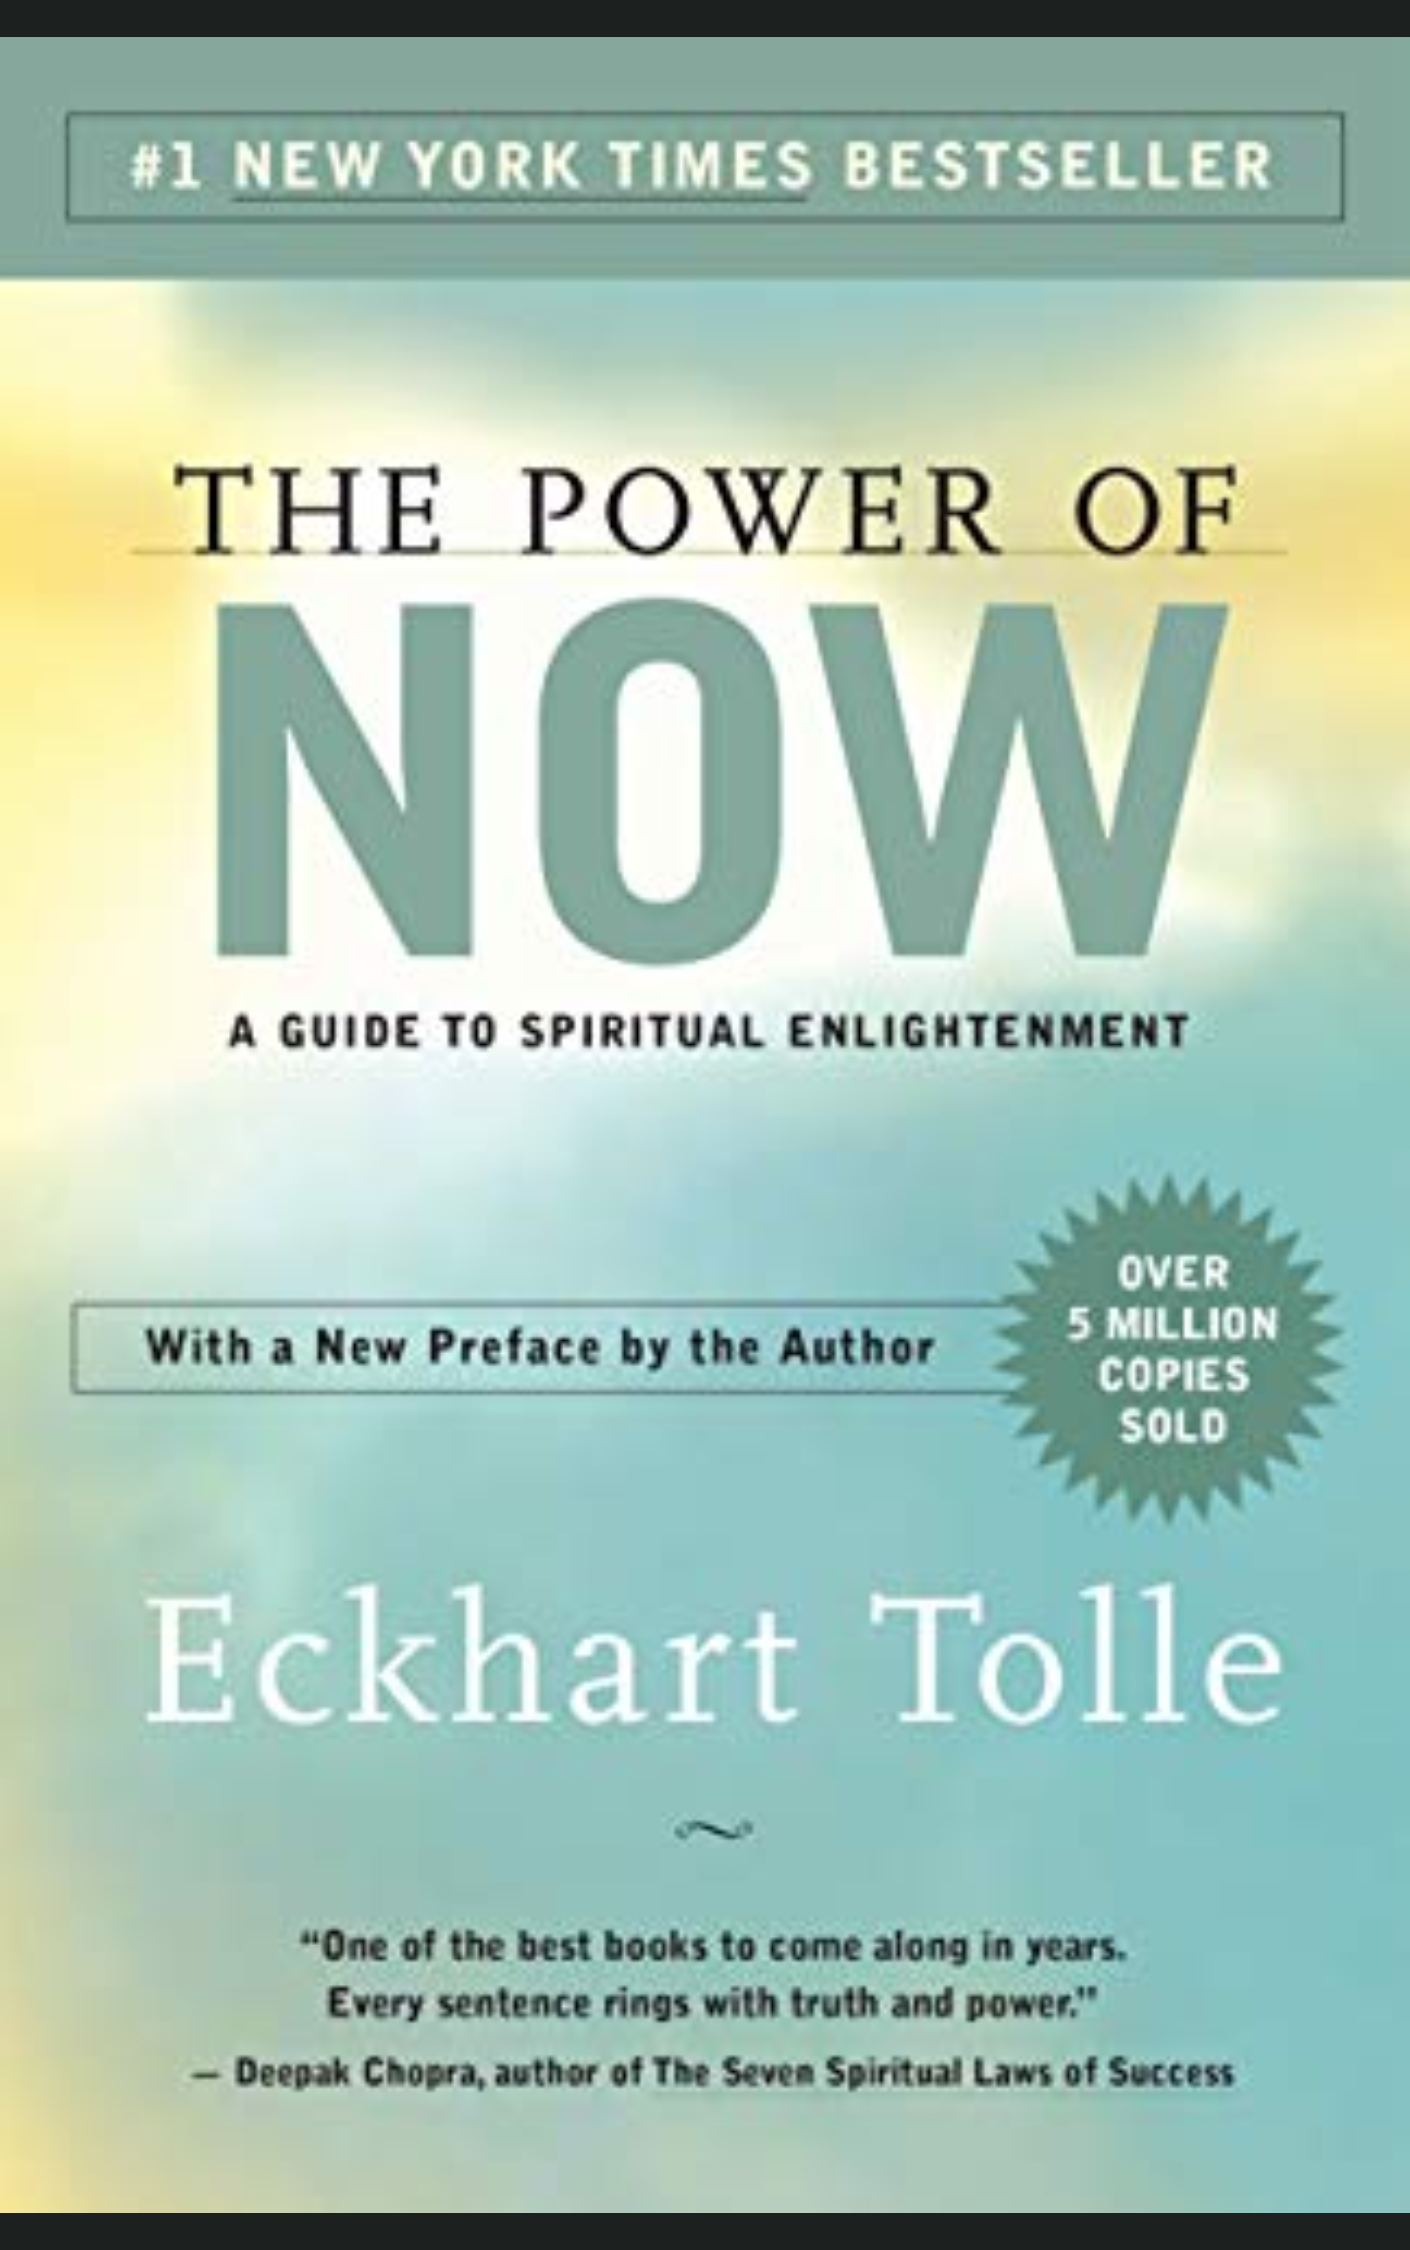 THE POWER OF NOW by ECKHART TOLLE